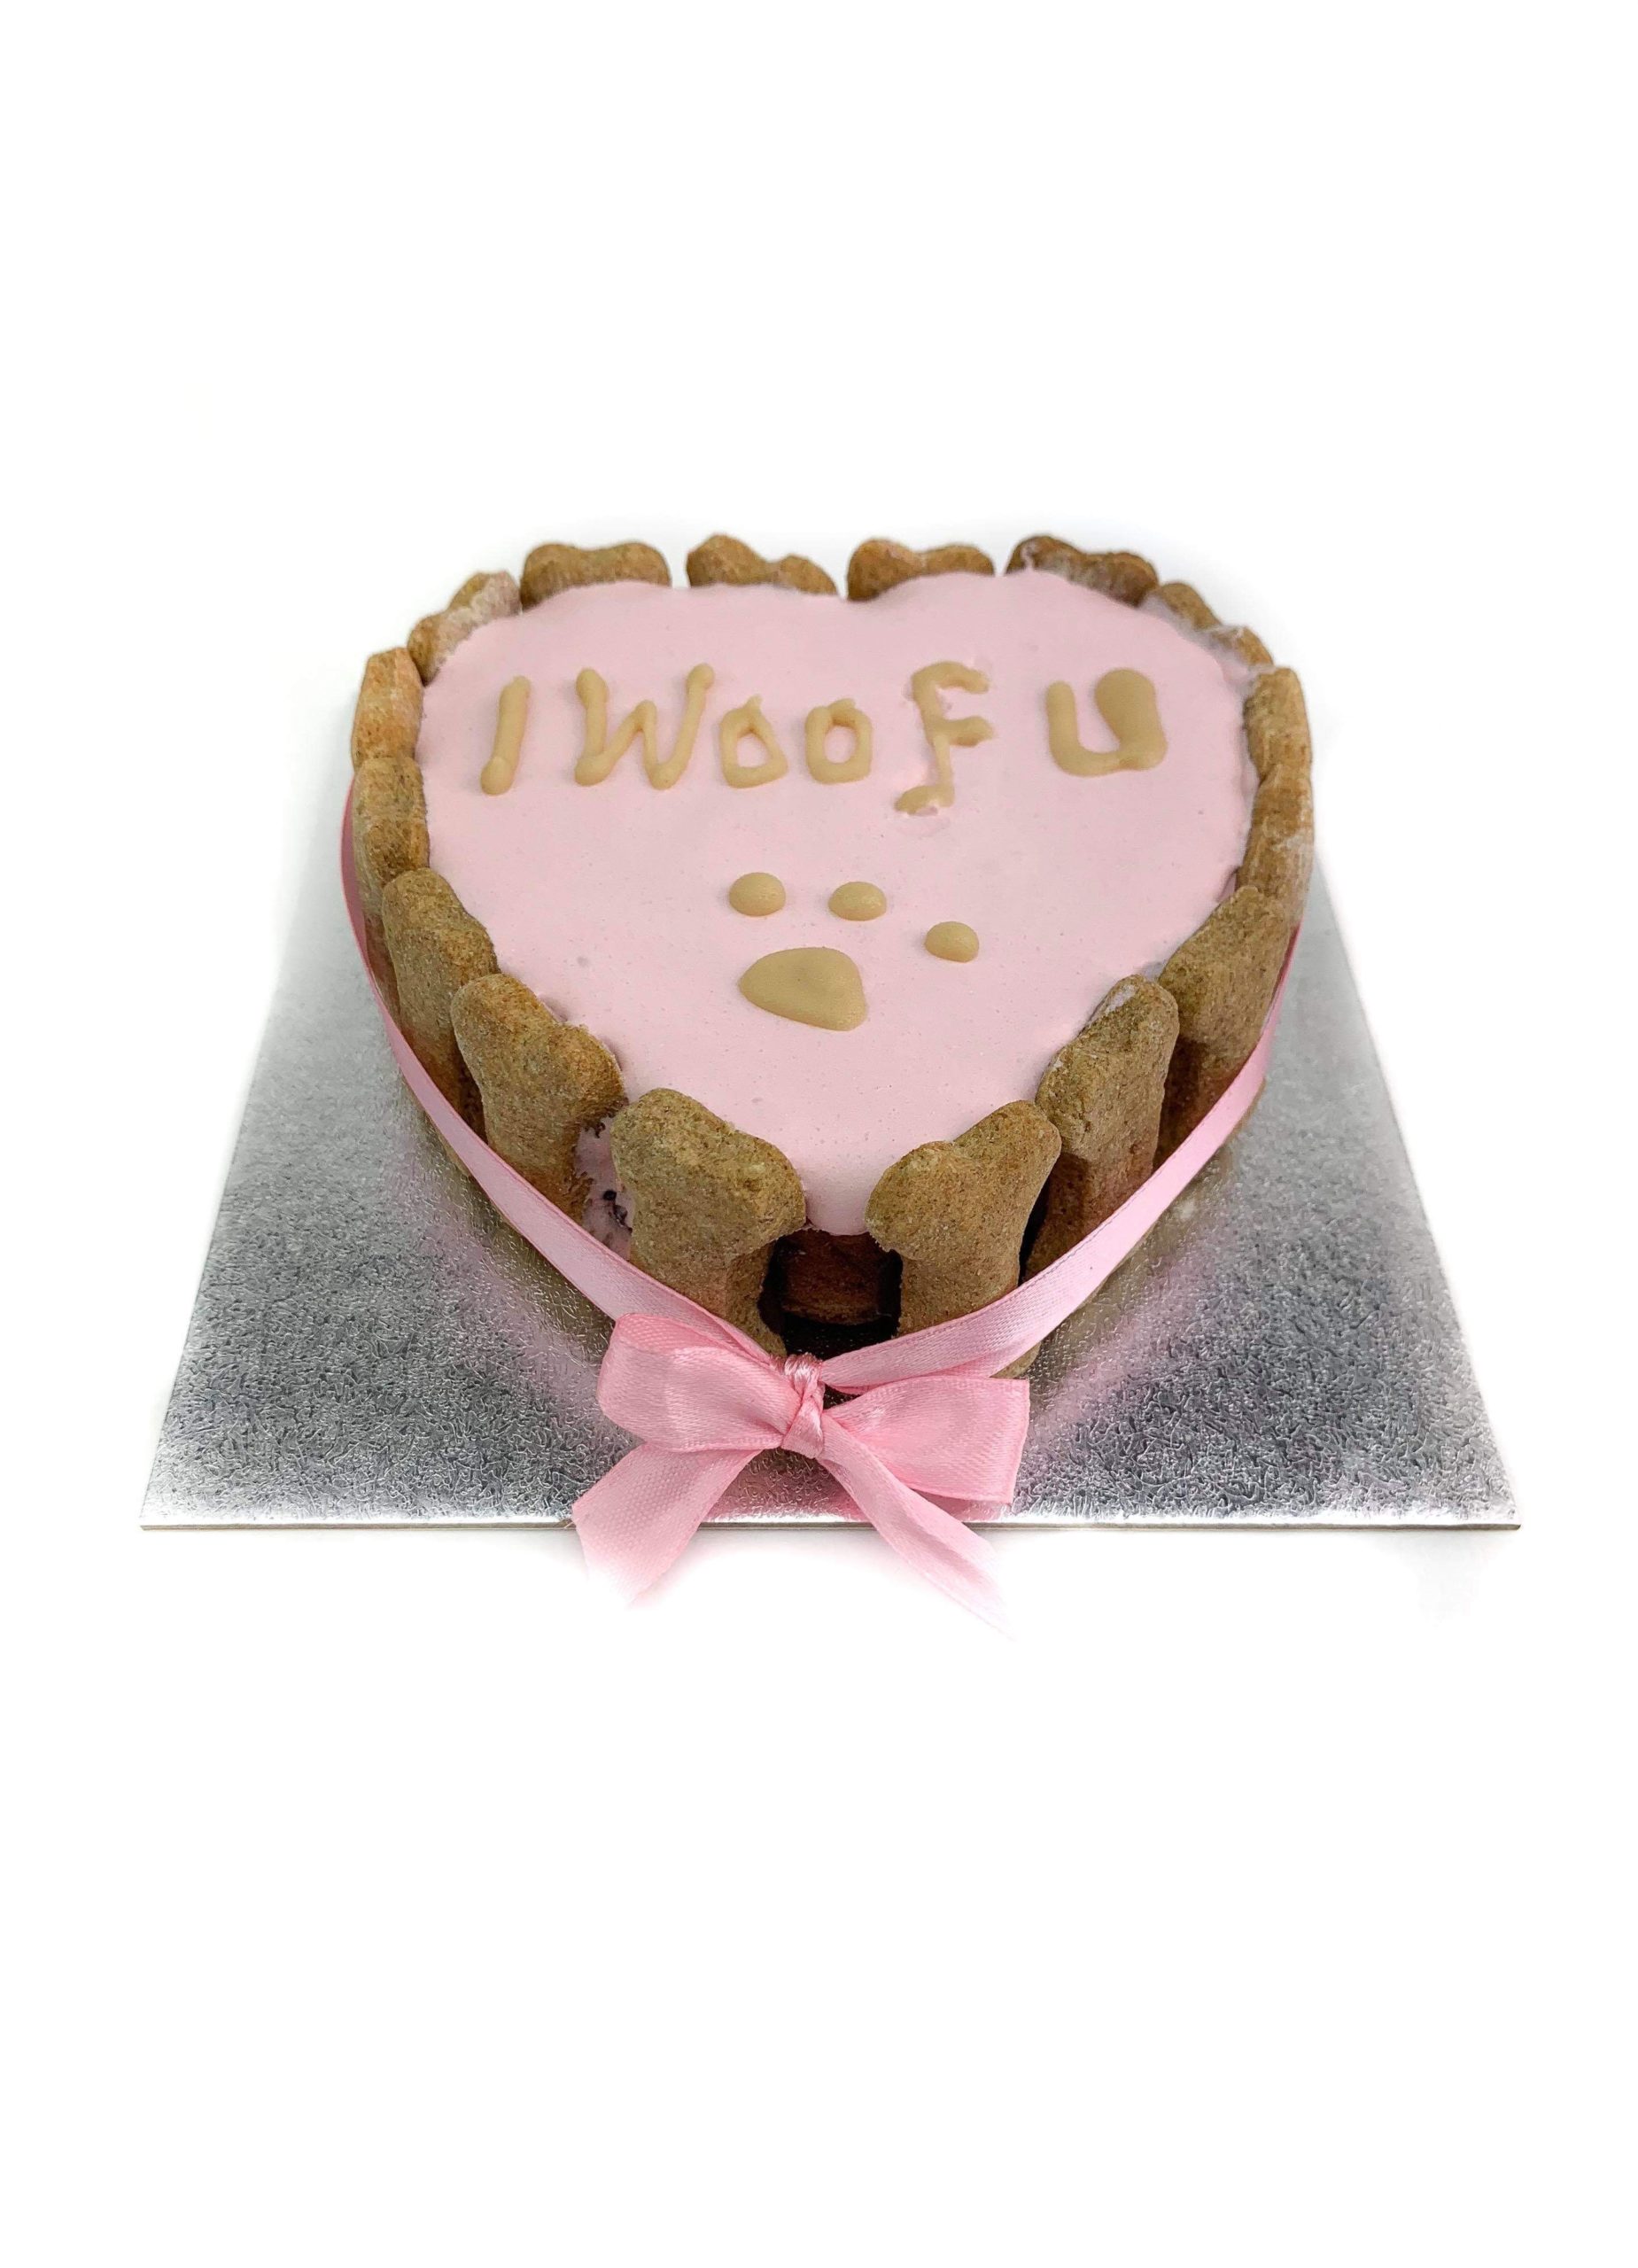 Mango Flavor Heart Birthday Cake For Love With Name On